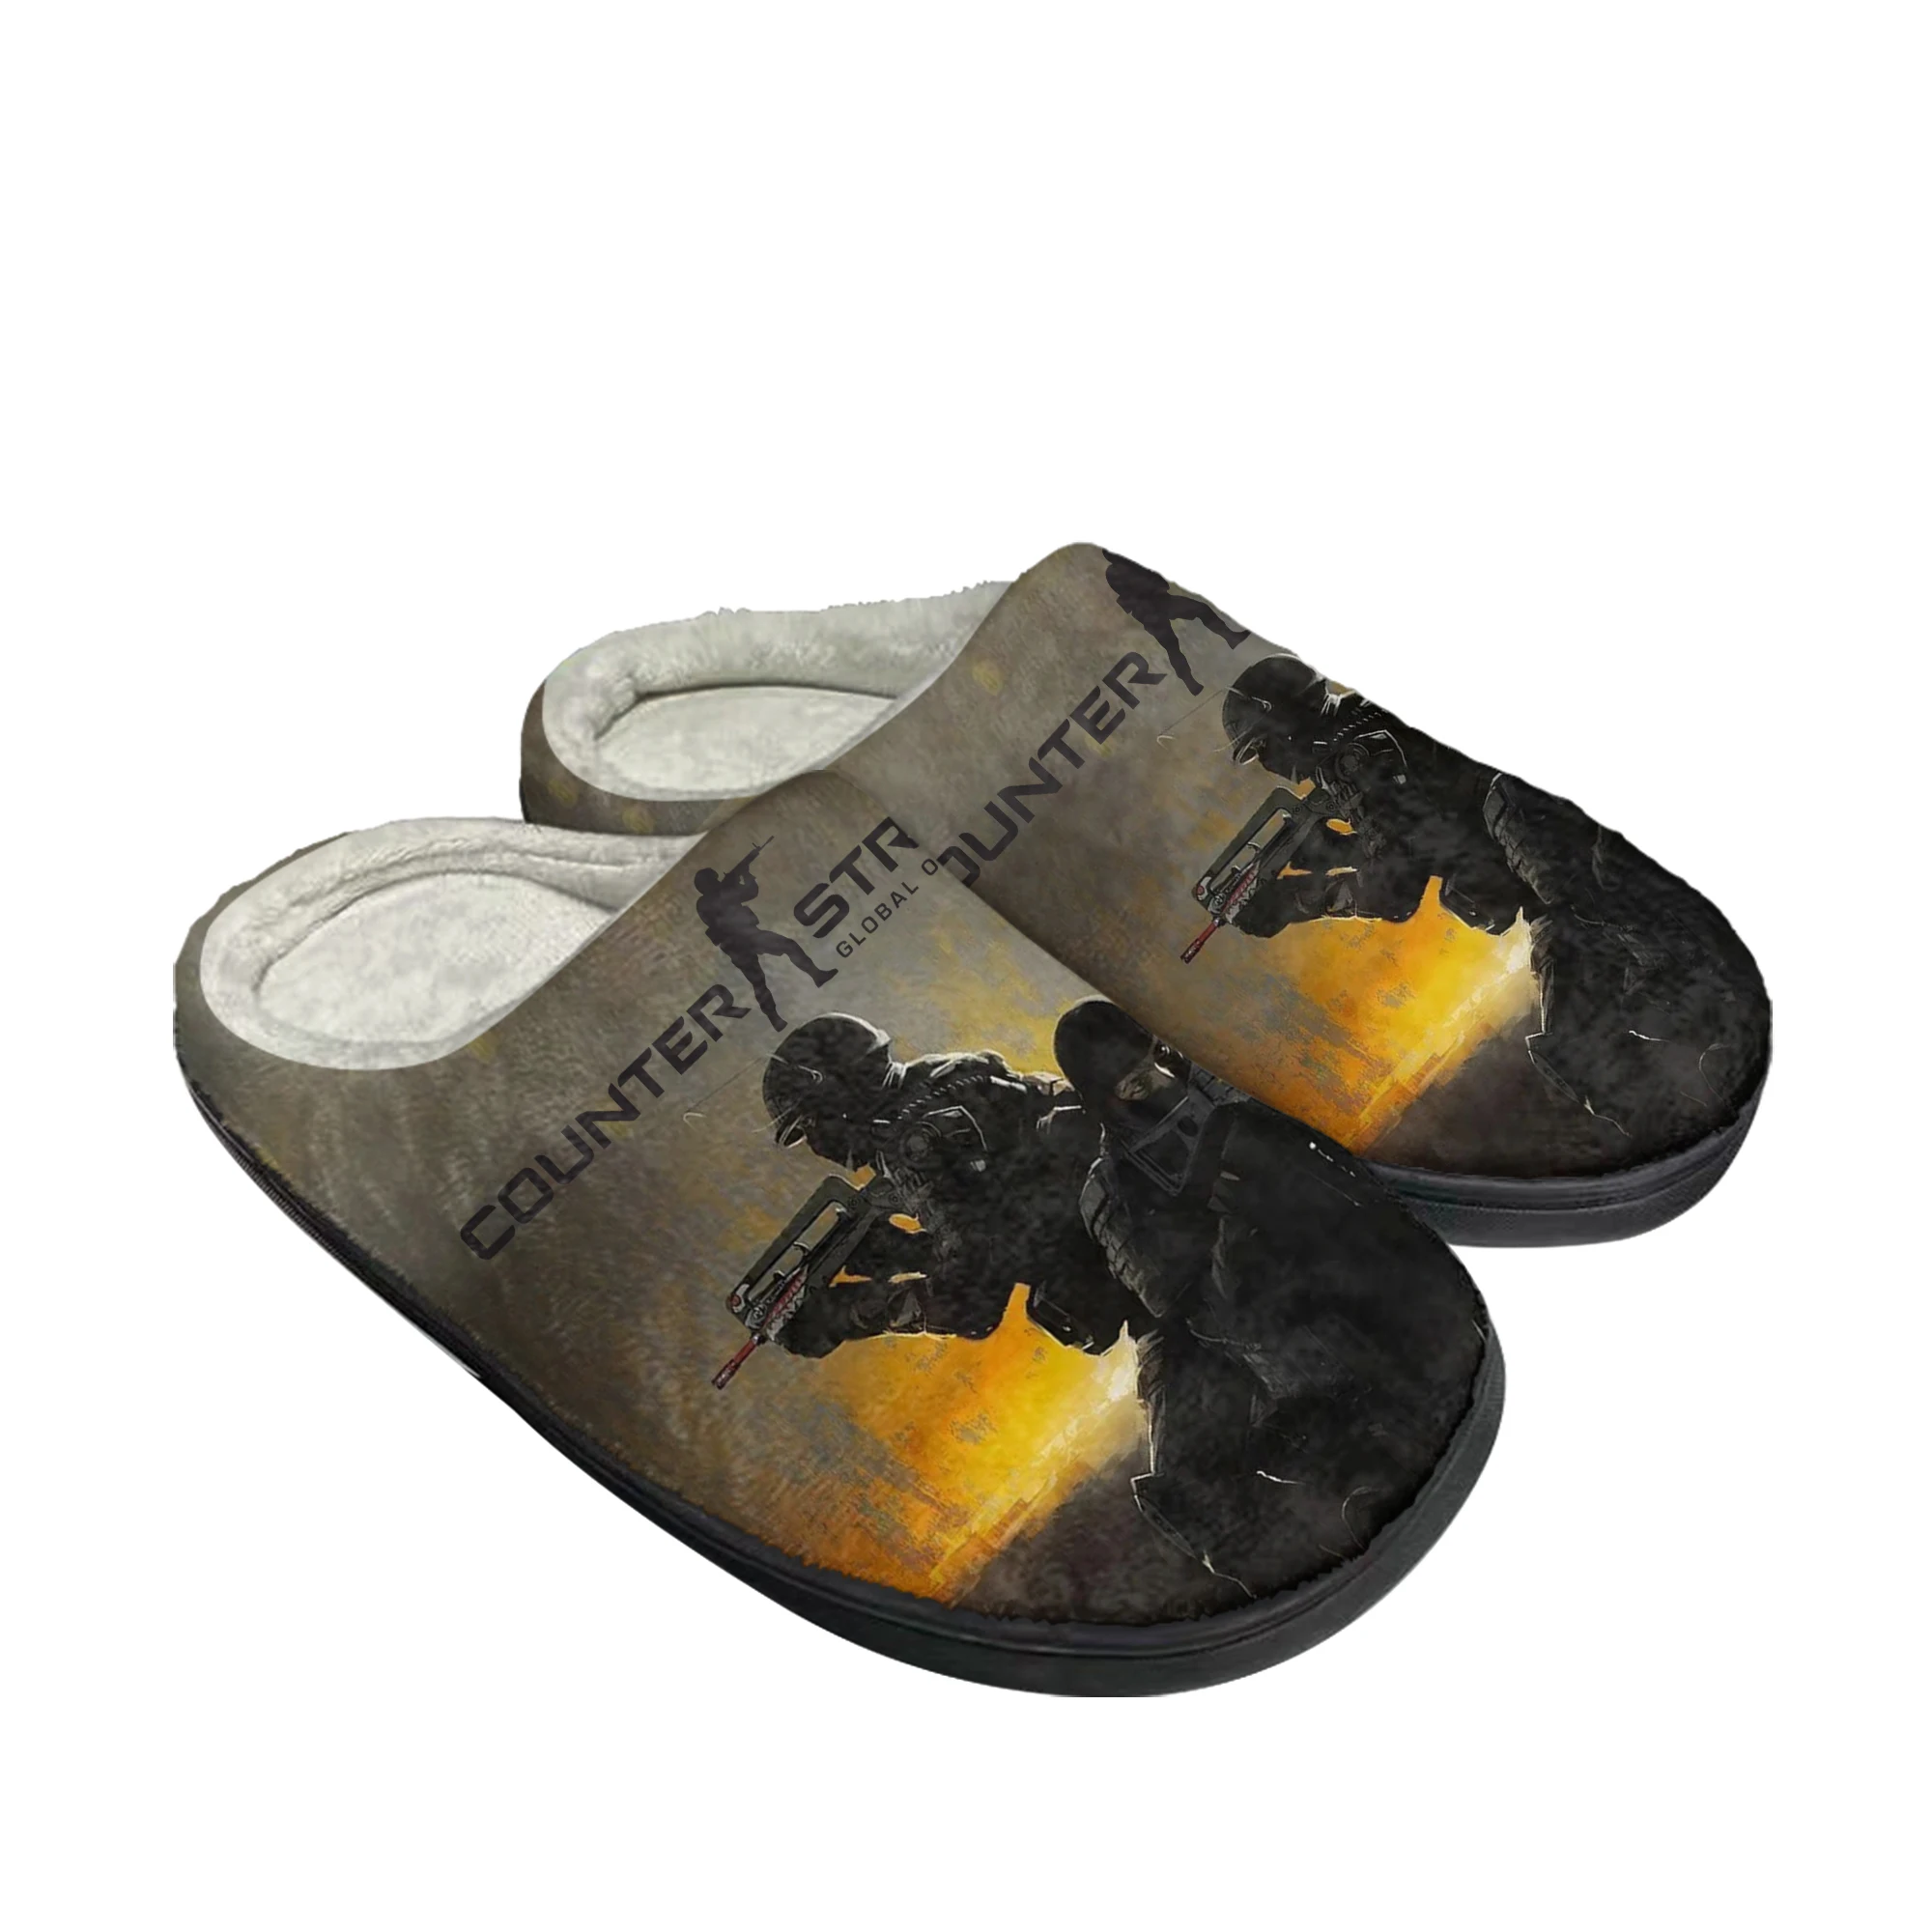 

Cartoon Game Counter Strike Global Offensive Home Slippers Mens Womens Plush Bedroom Casual Keep Warm Shoes Tailor Made Slipper